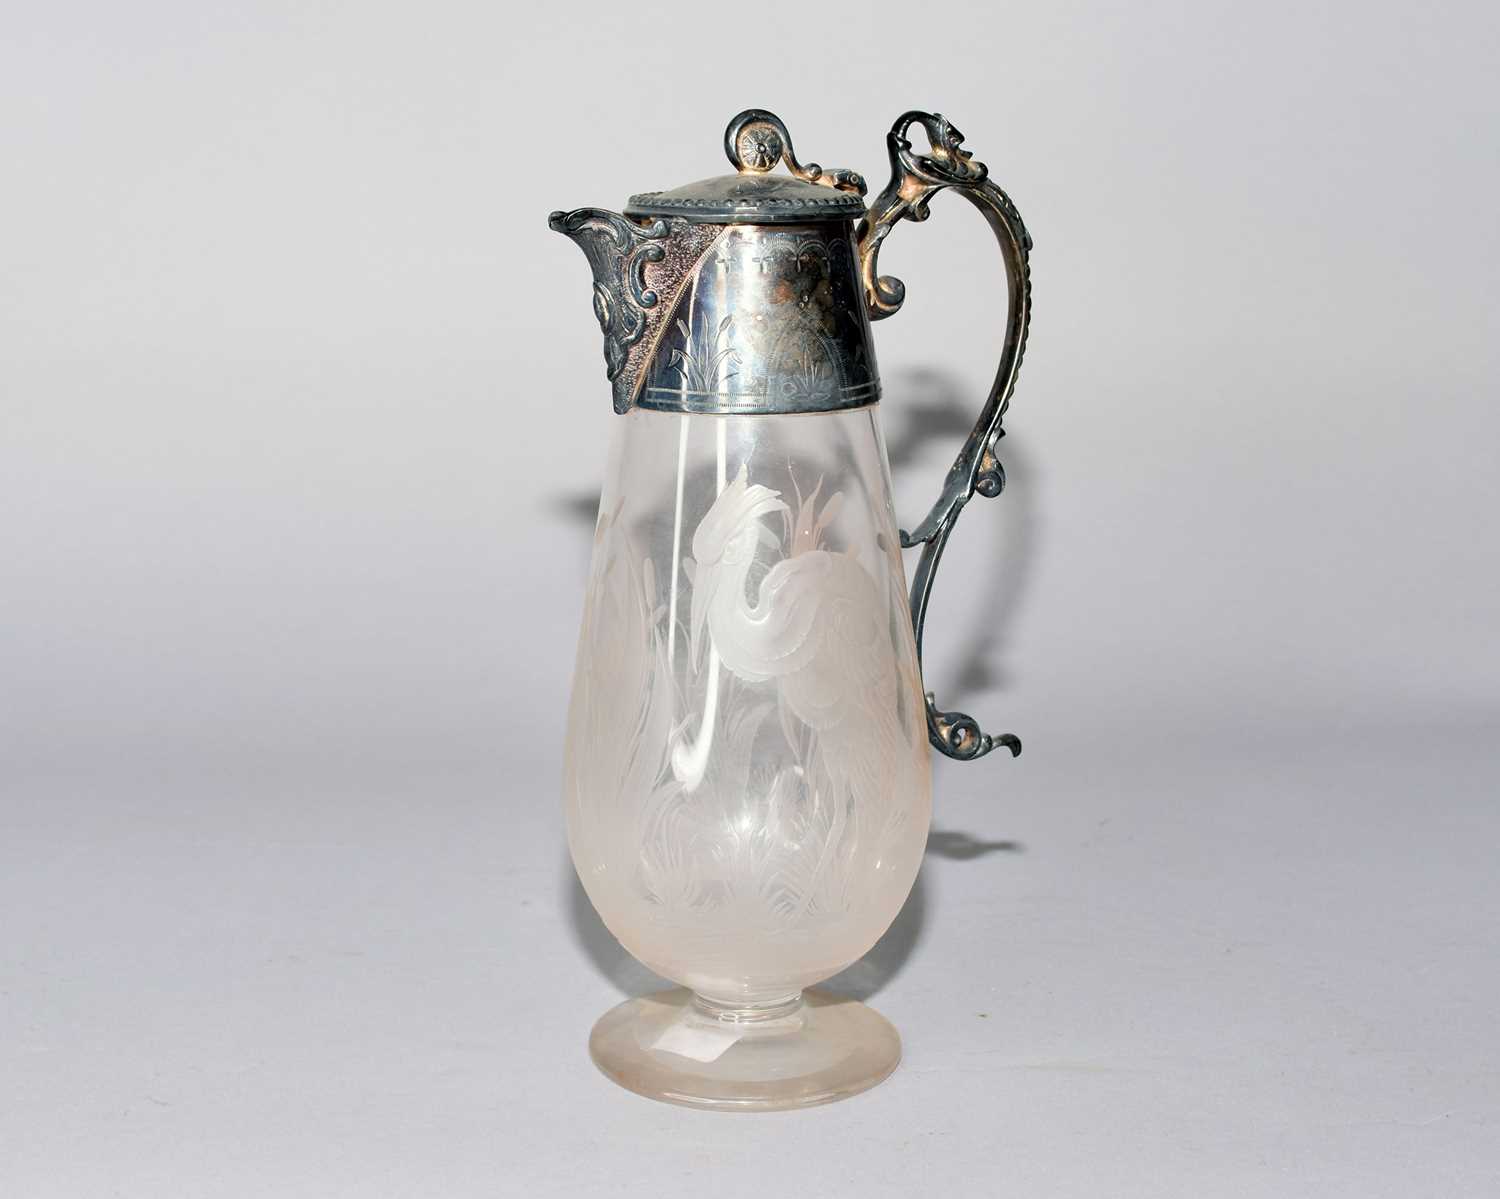 Lot 26 - An electroplated mounted glass jug